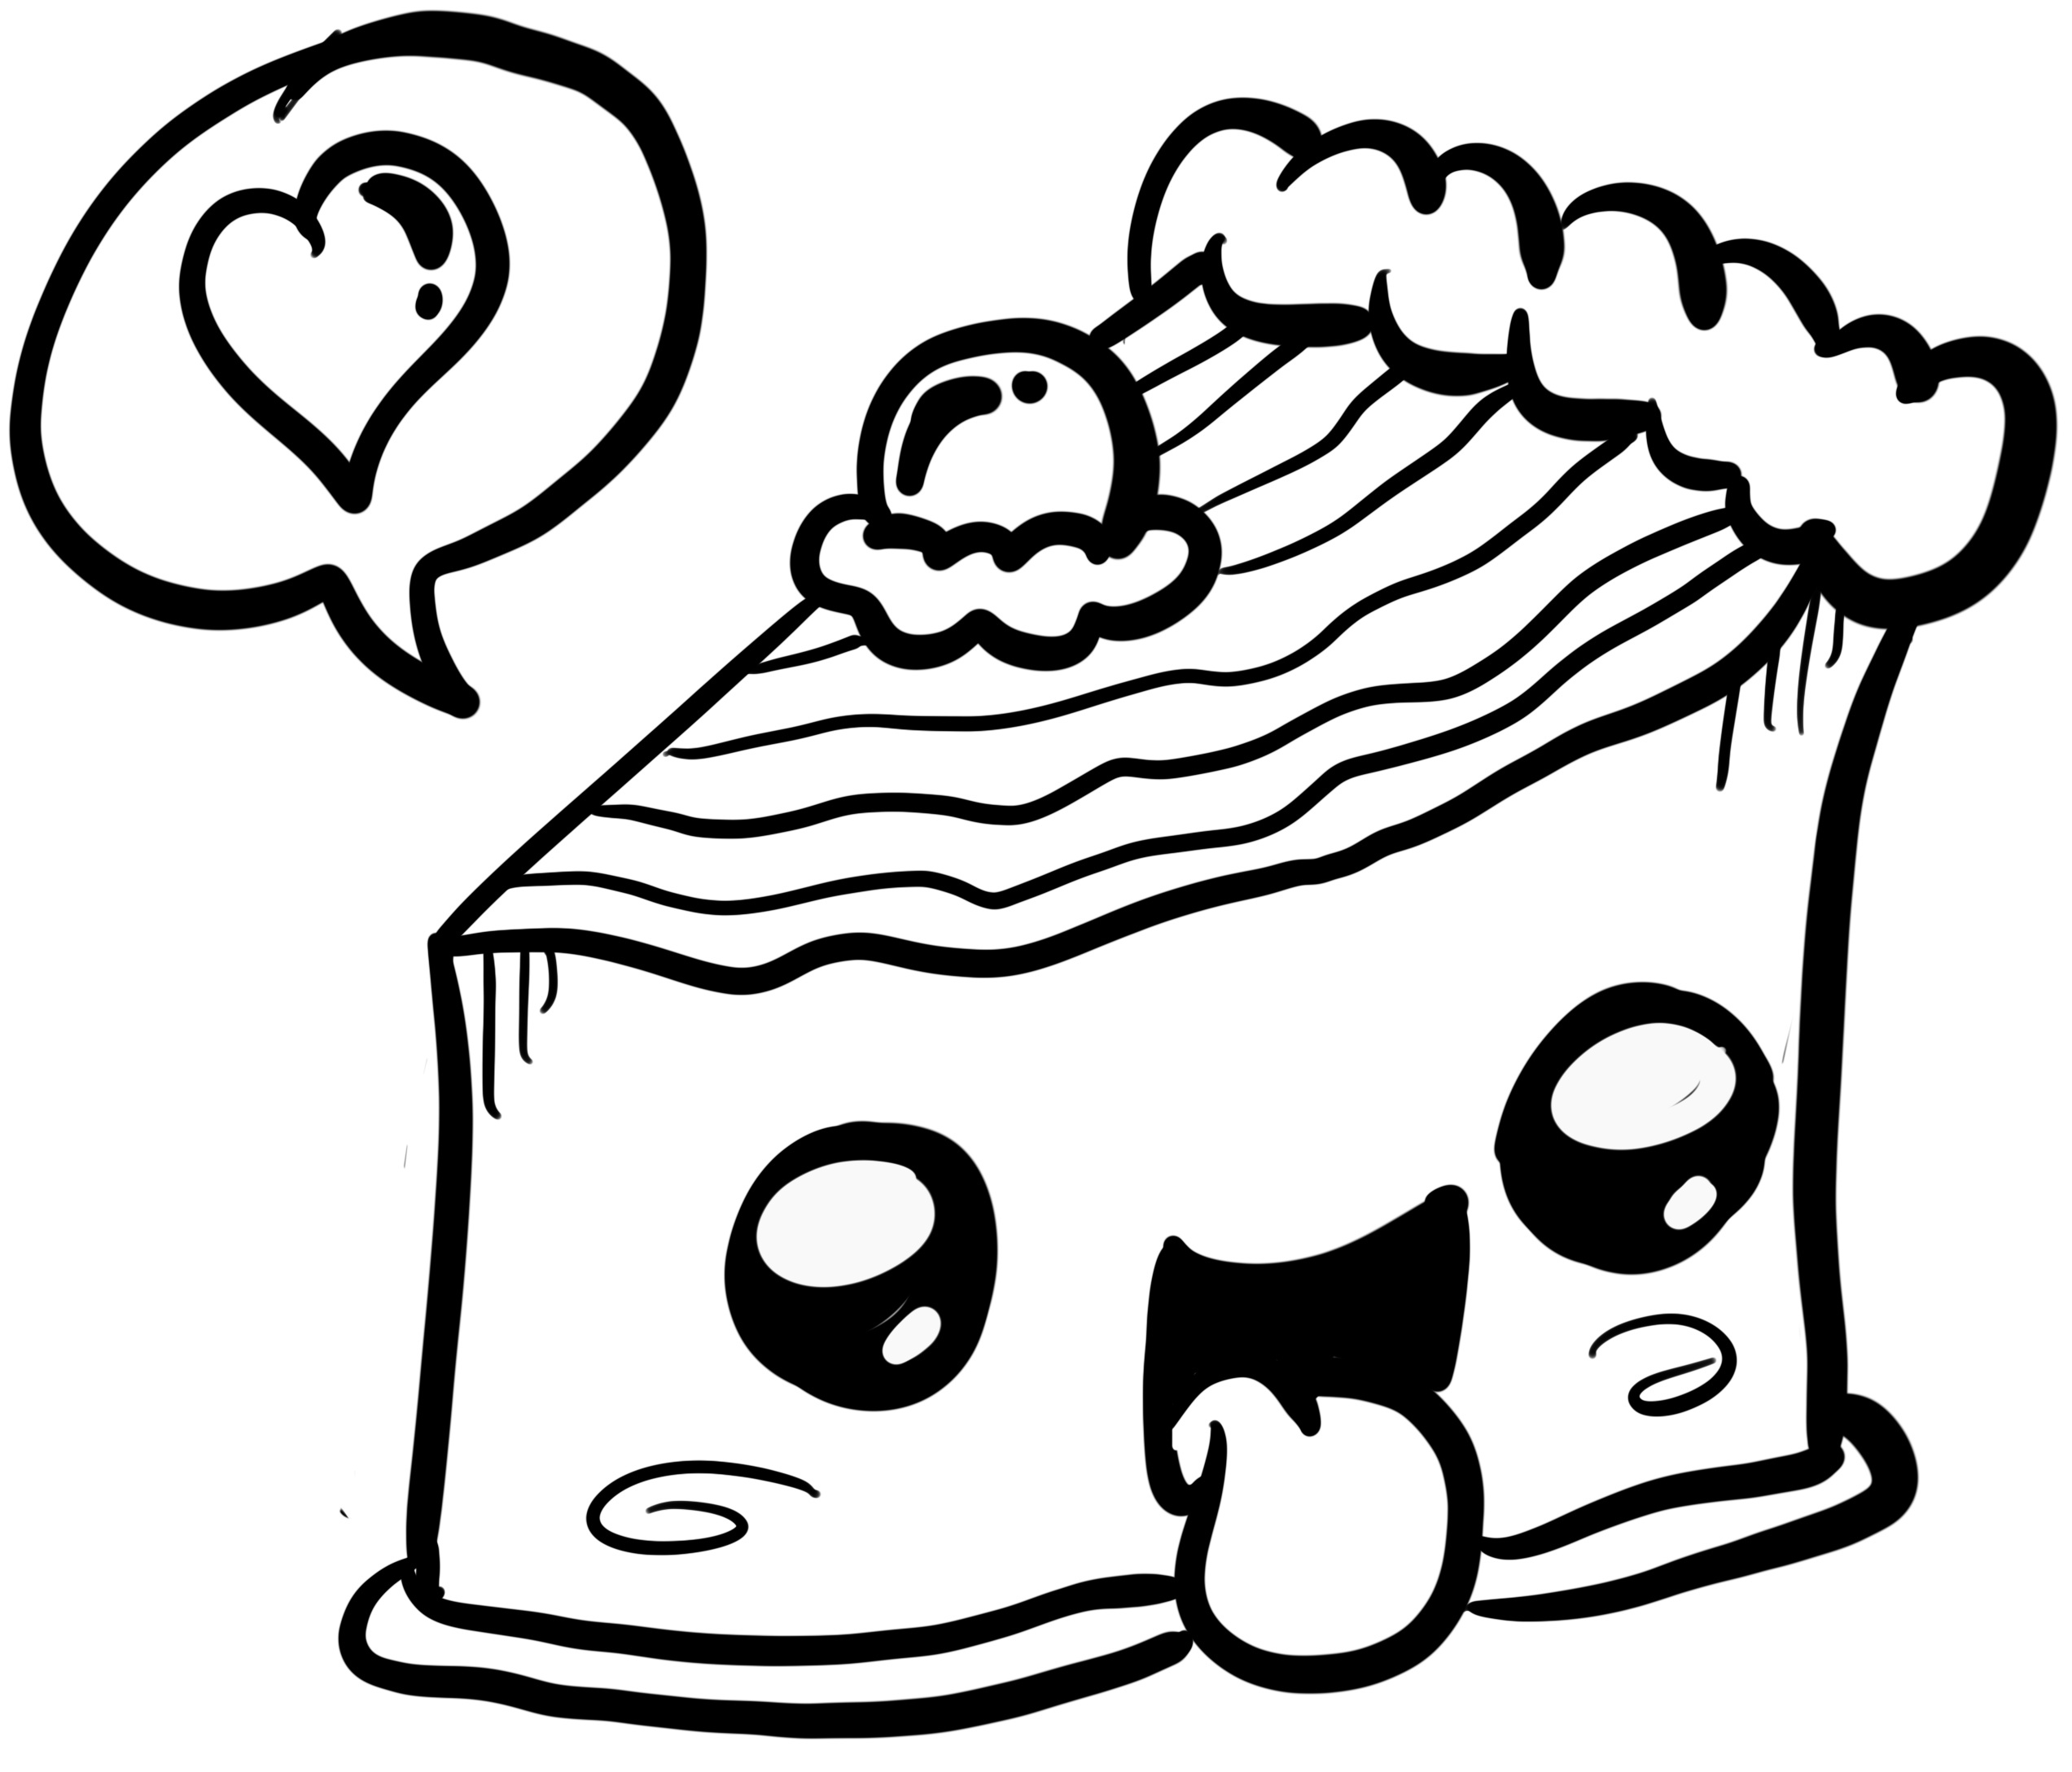 Kawaii Delicious Cake Food Coloring Pages   Coloring Cool